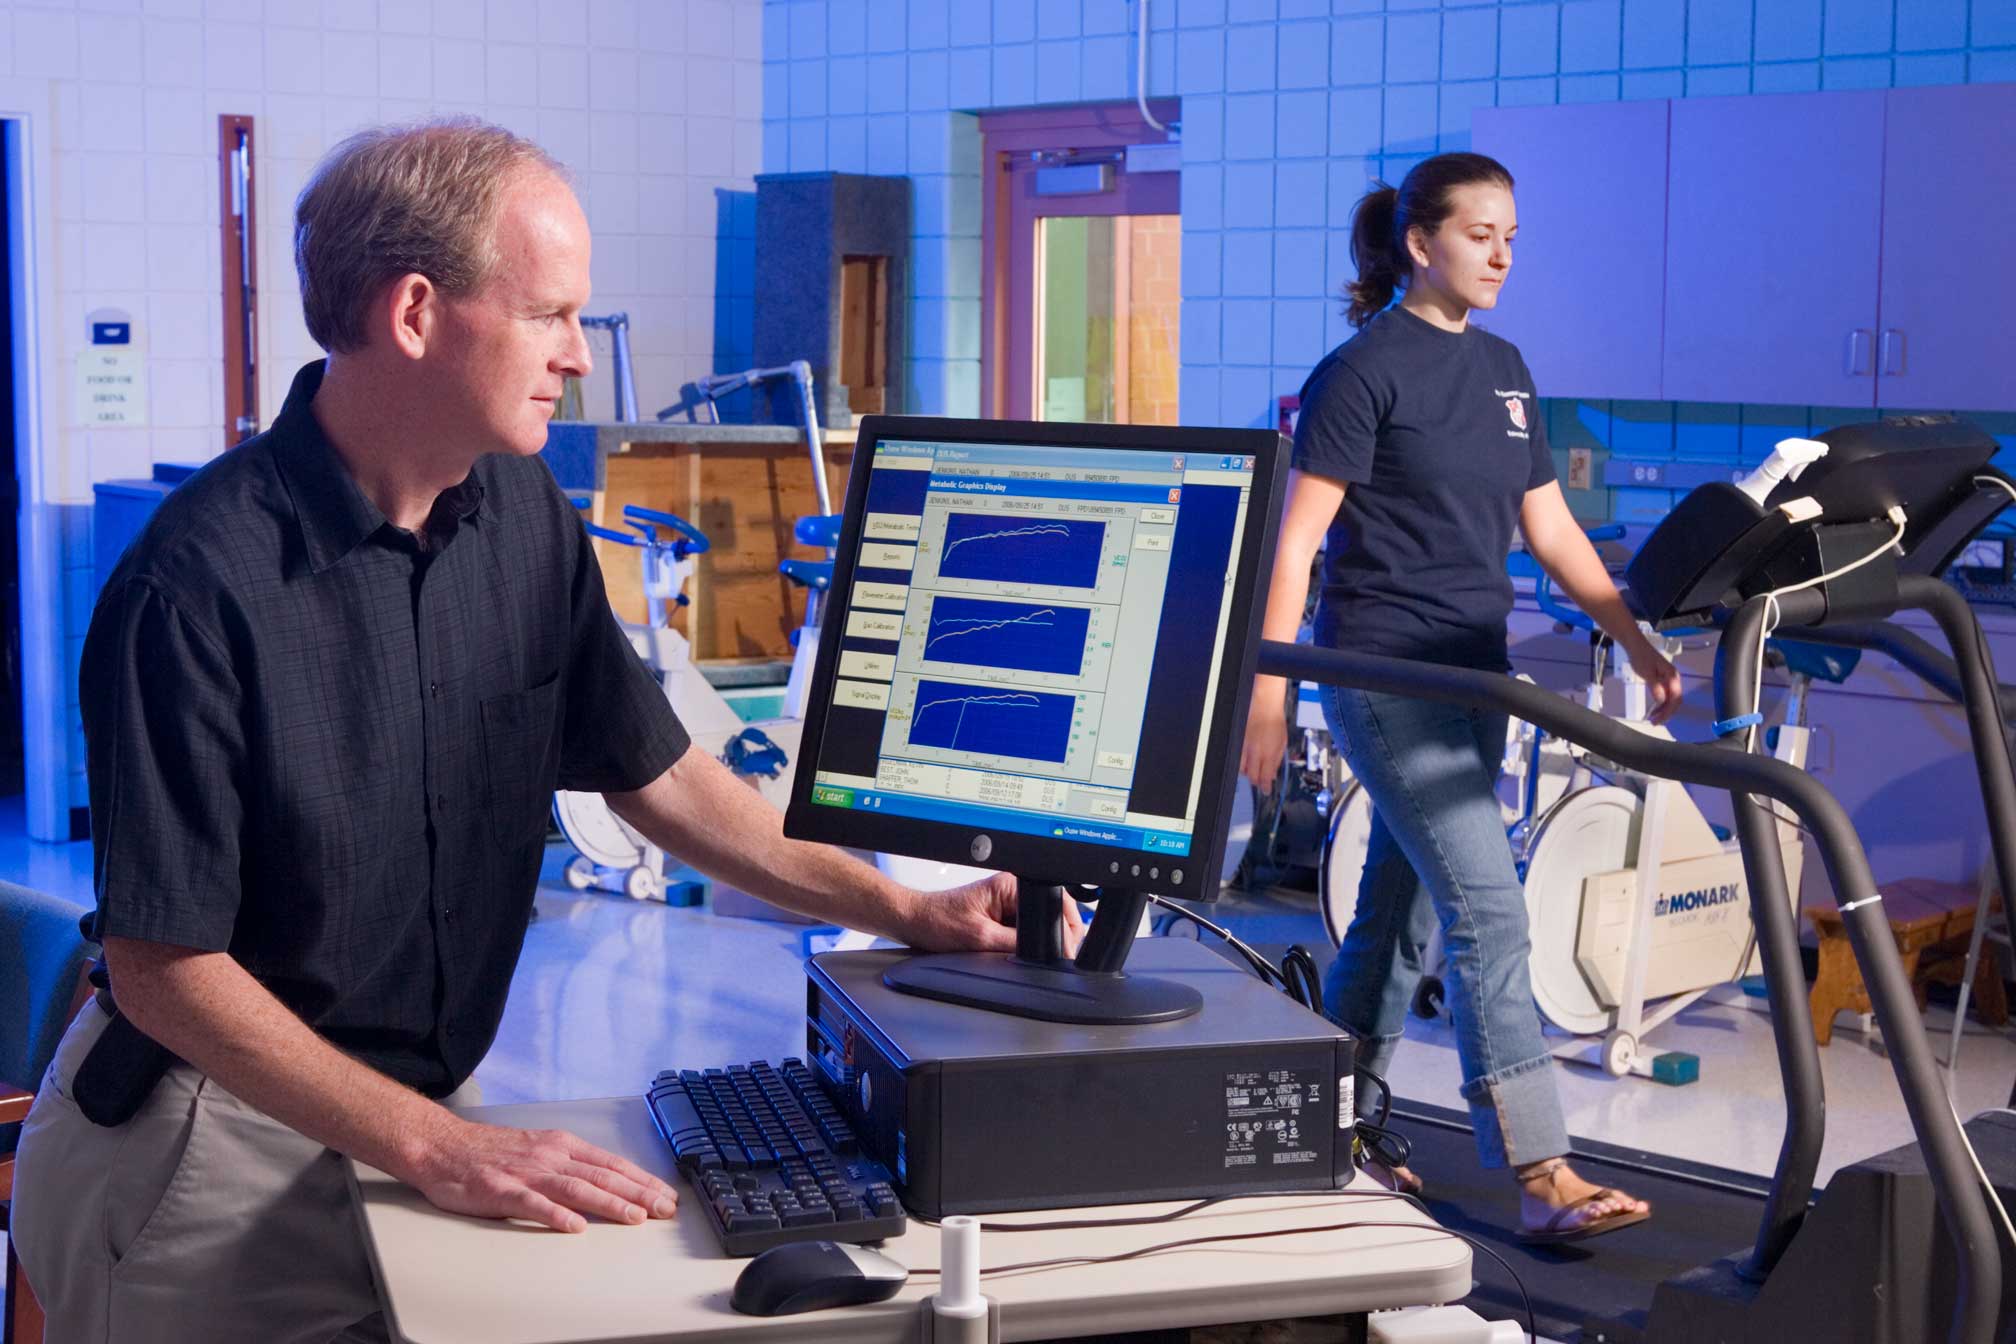 Researcher works with study participant, who is walking on a treadmill